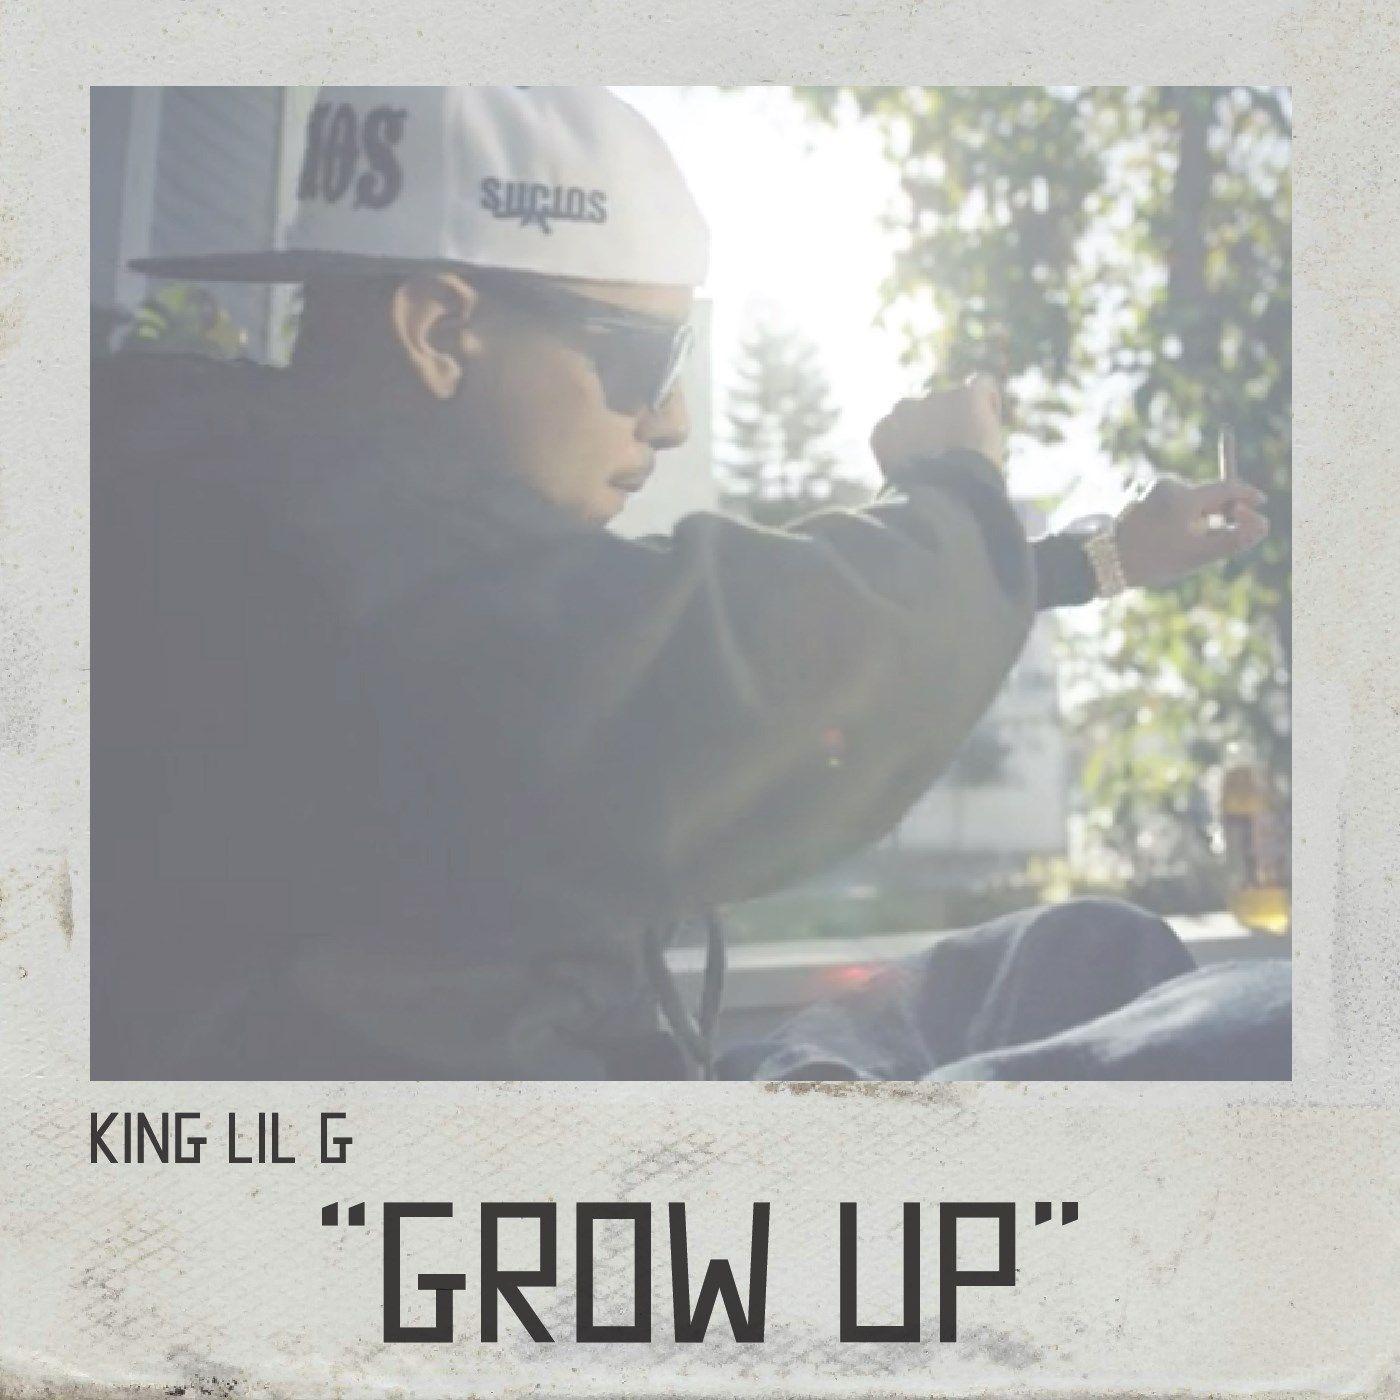 sucios king lil g wallpaper Wallppapers Gallery